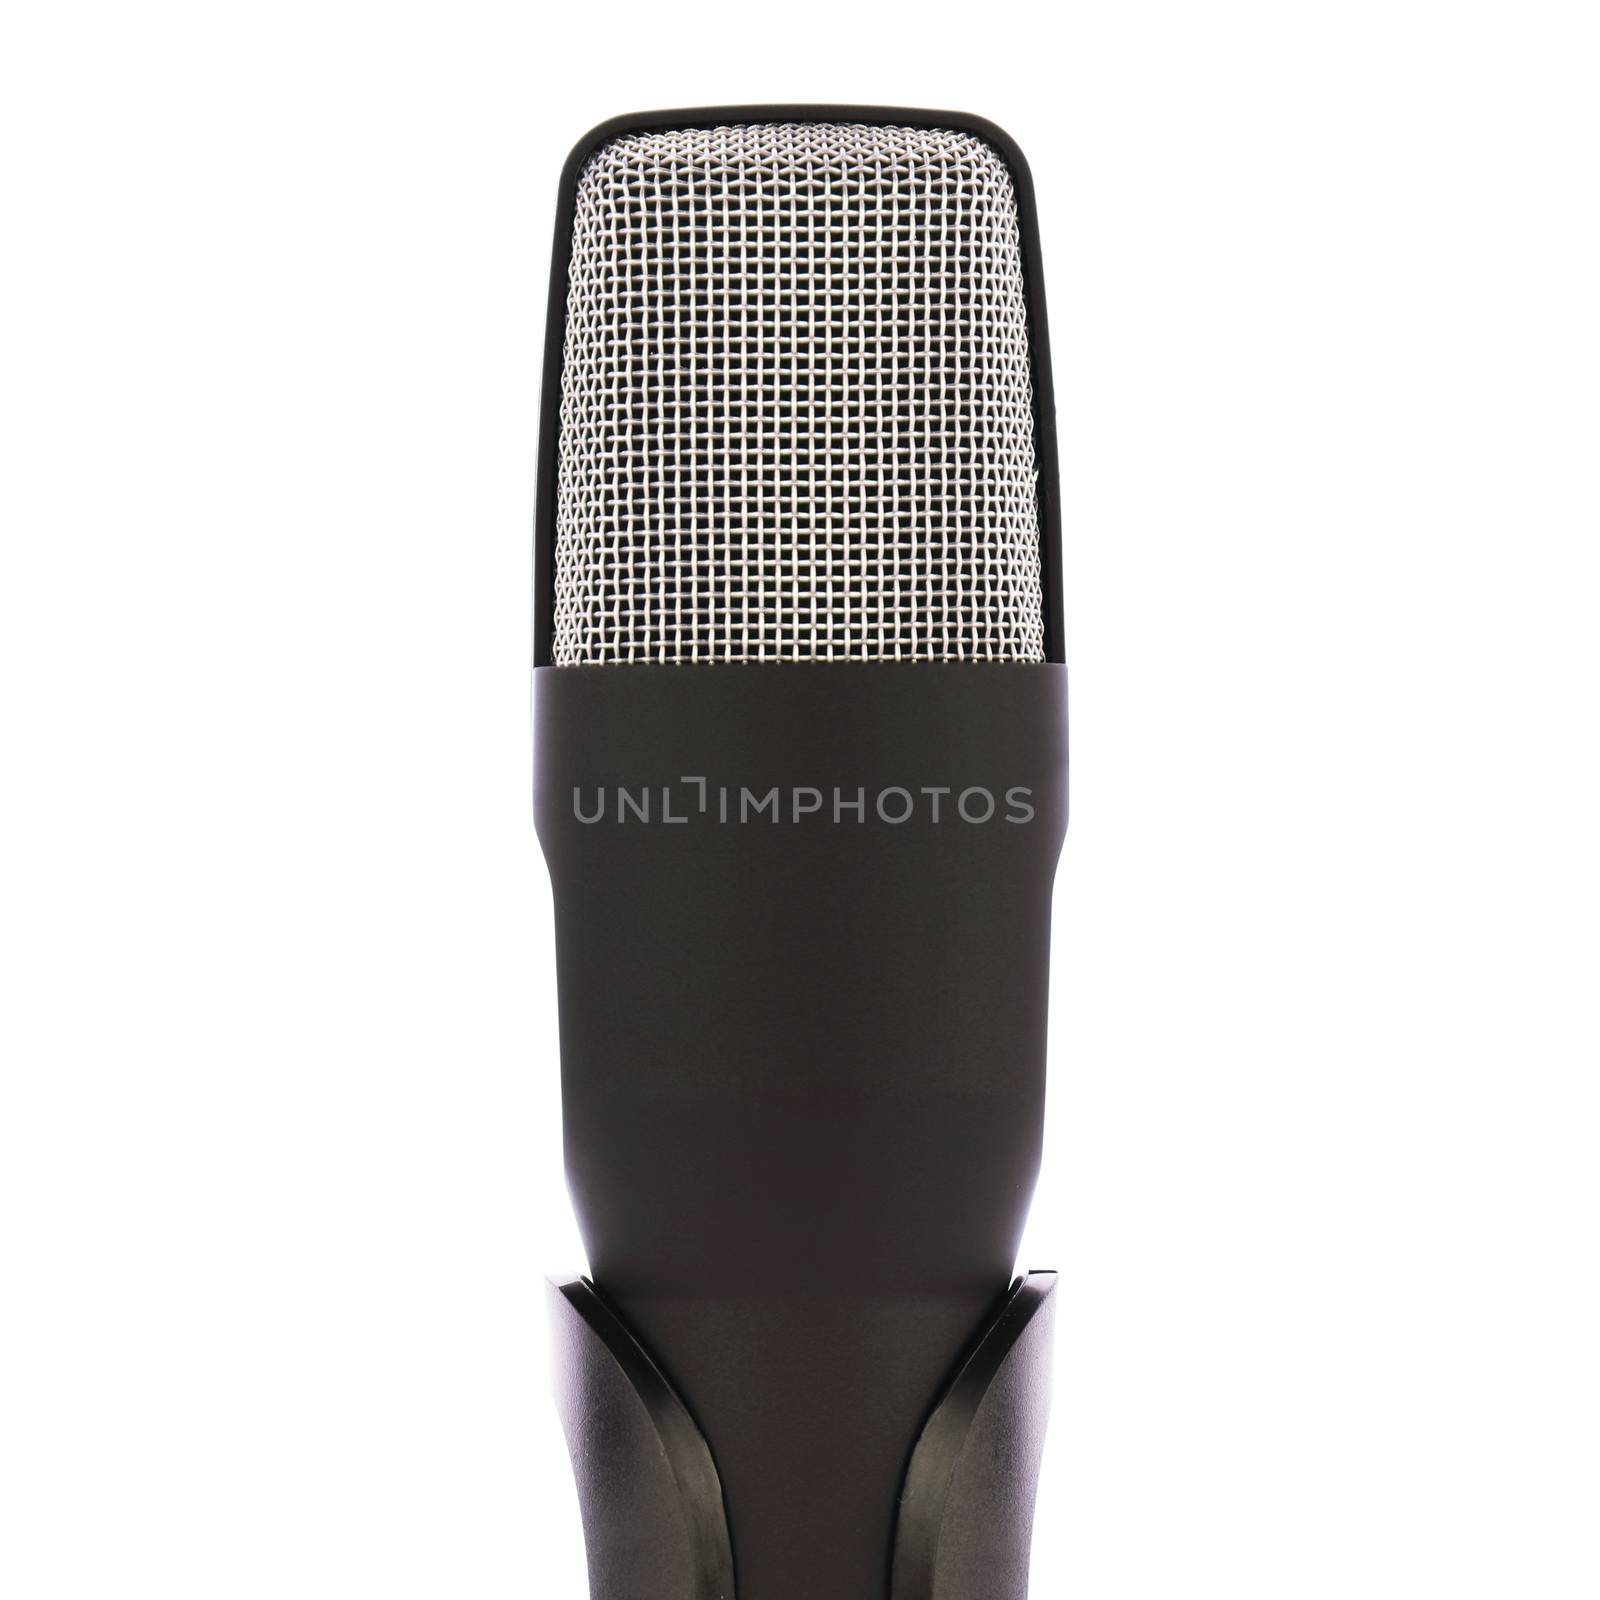 A broadcast microphone isolaed on a white background